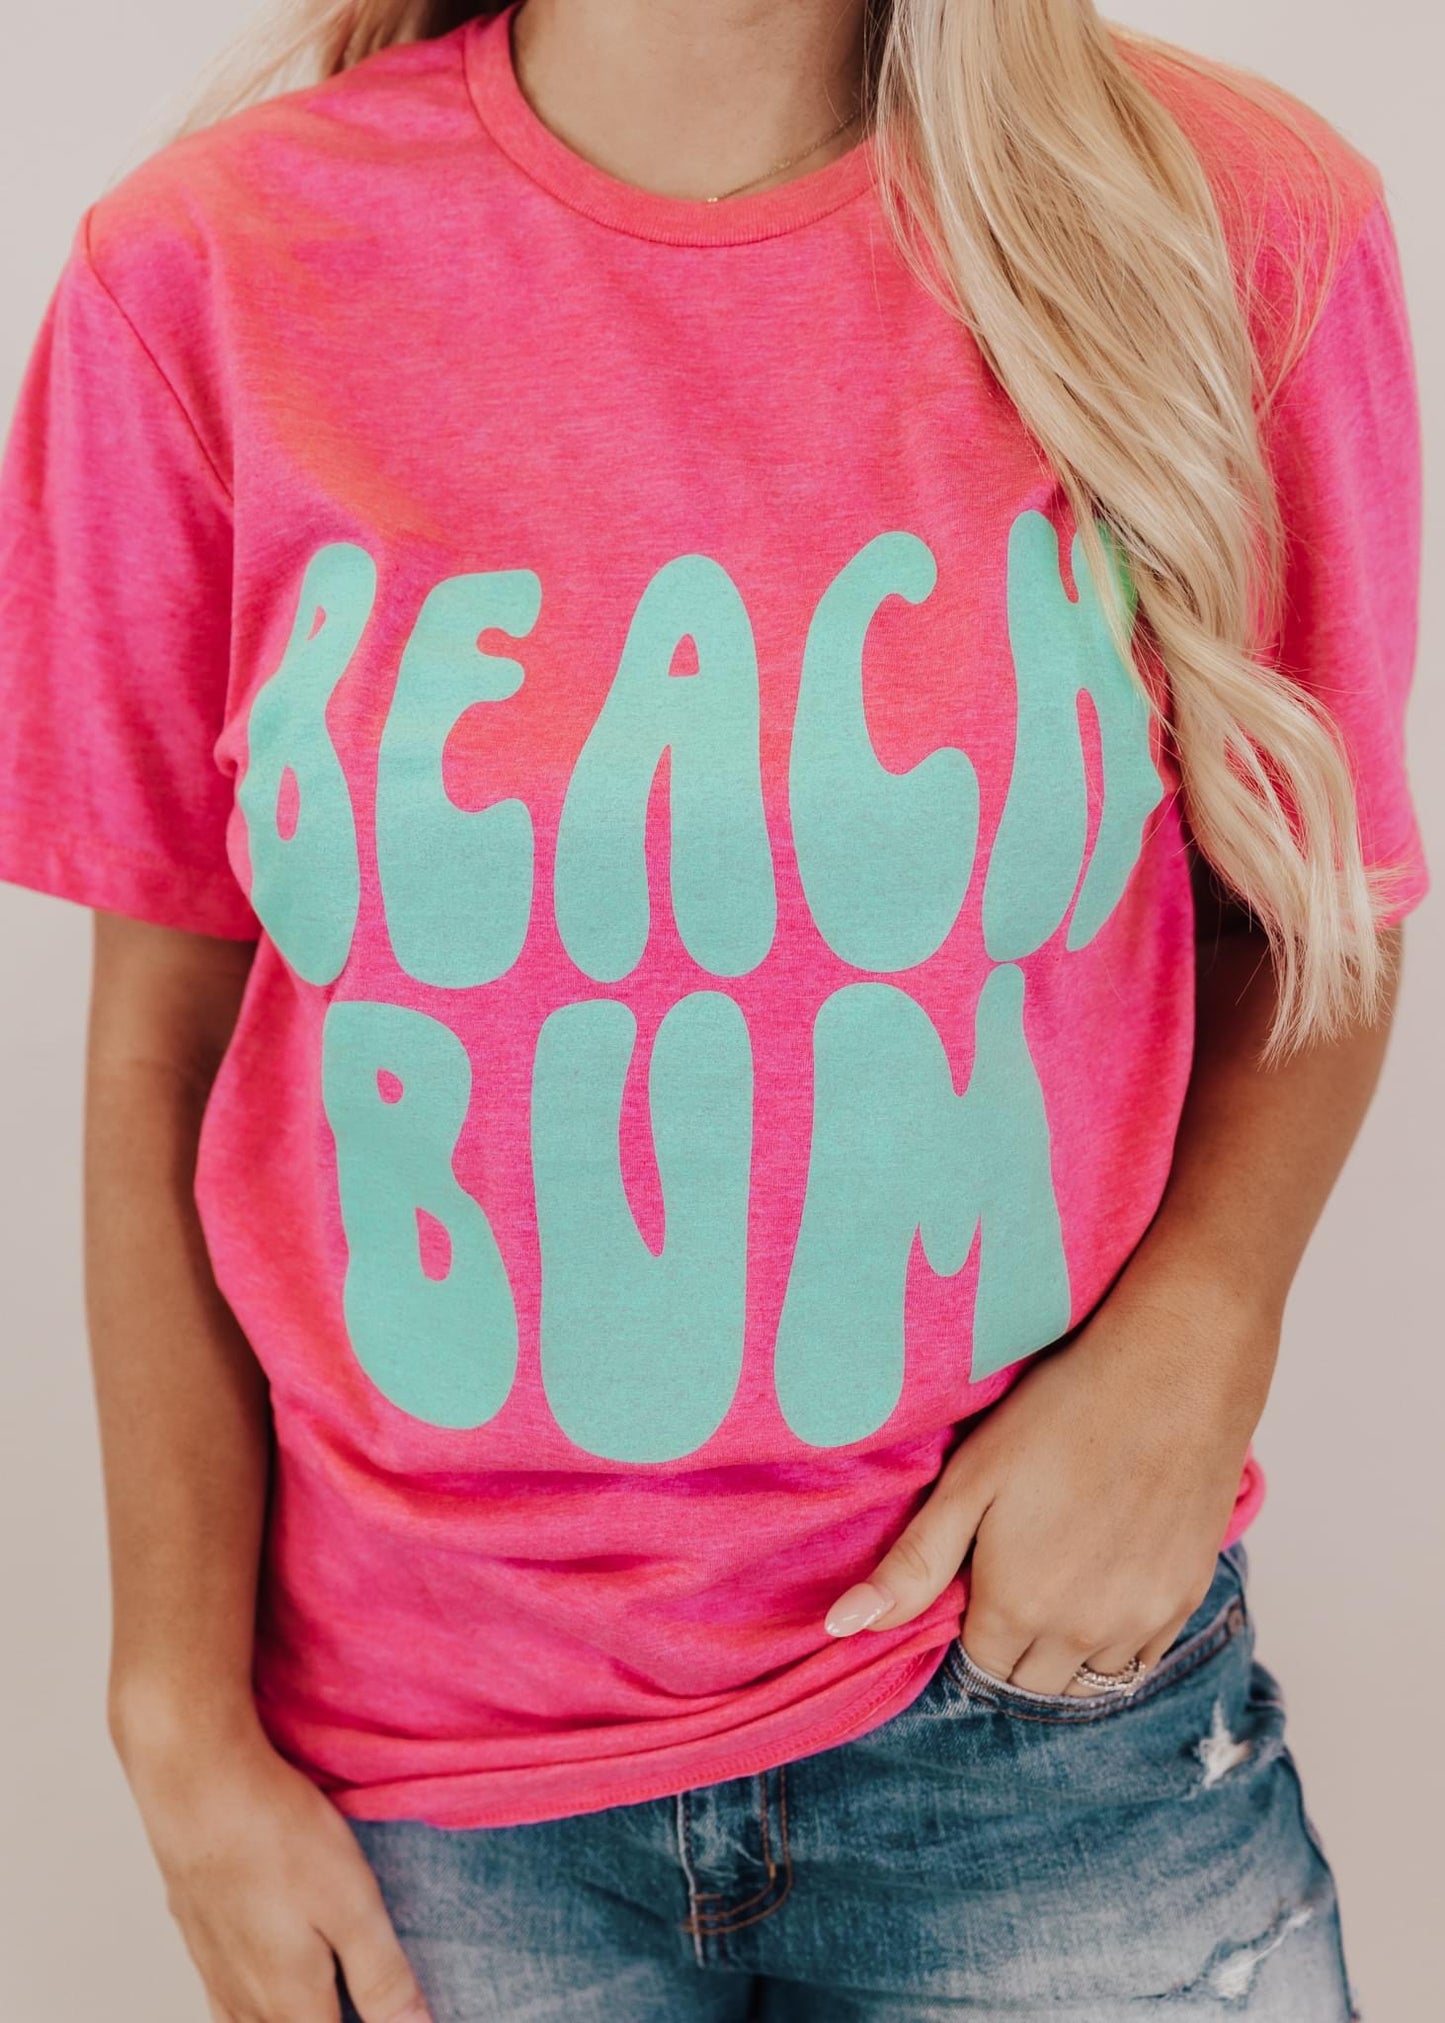 Beach Bums Adult Size